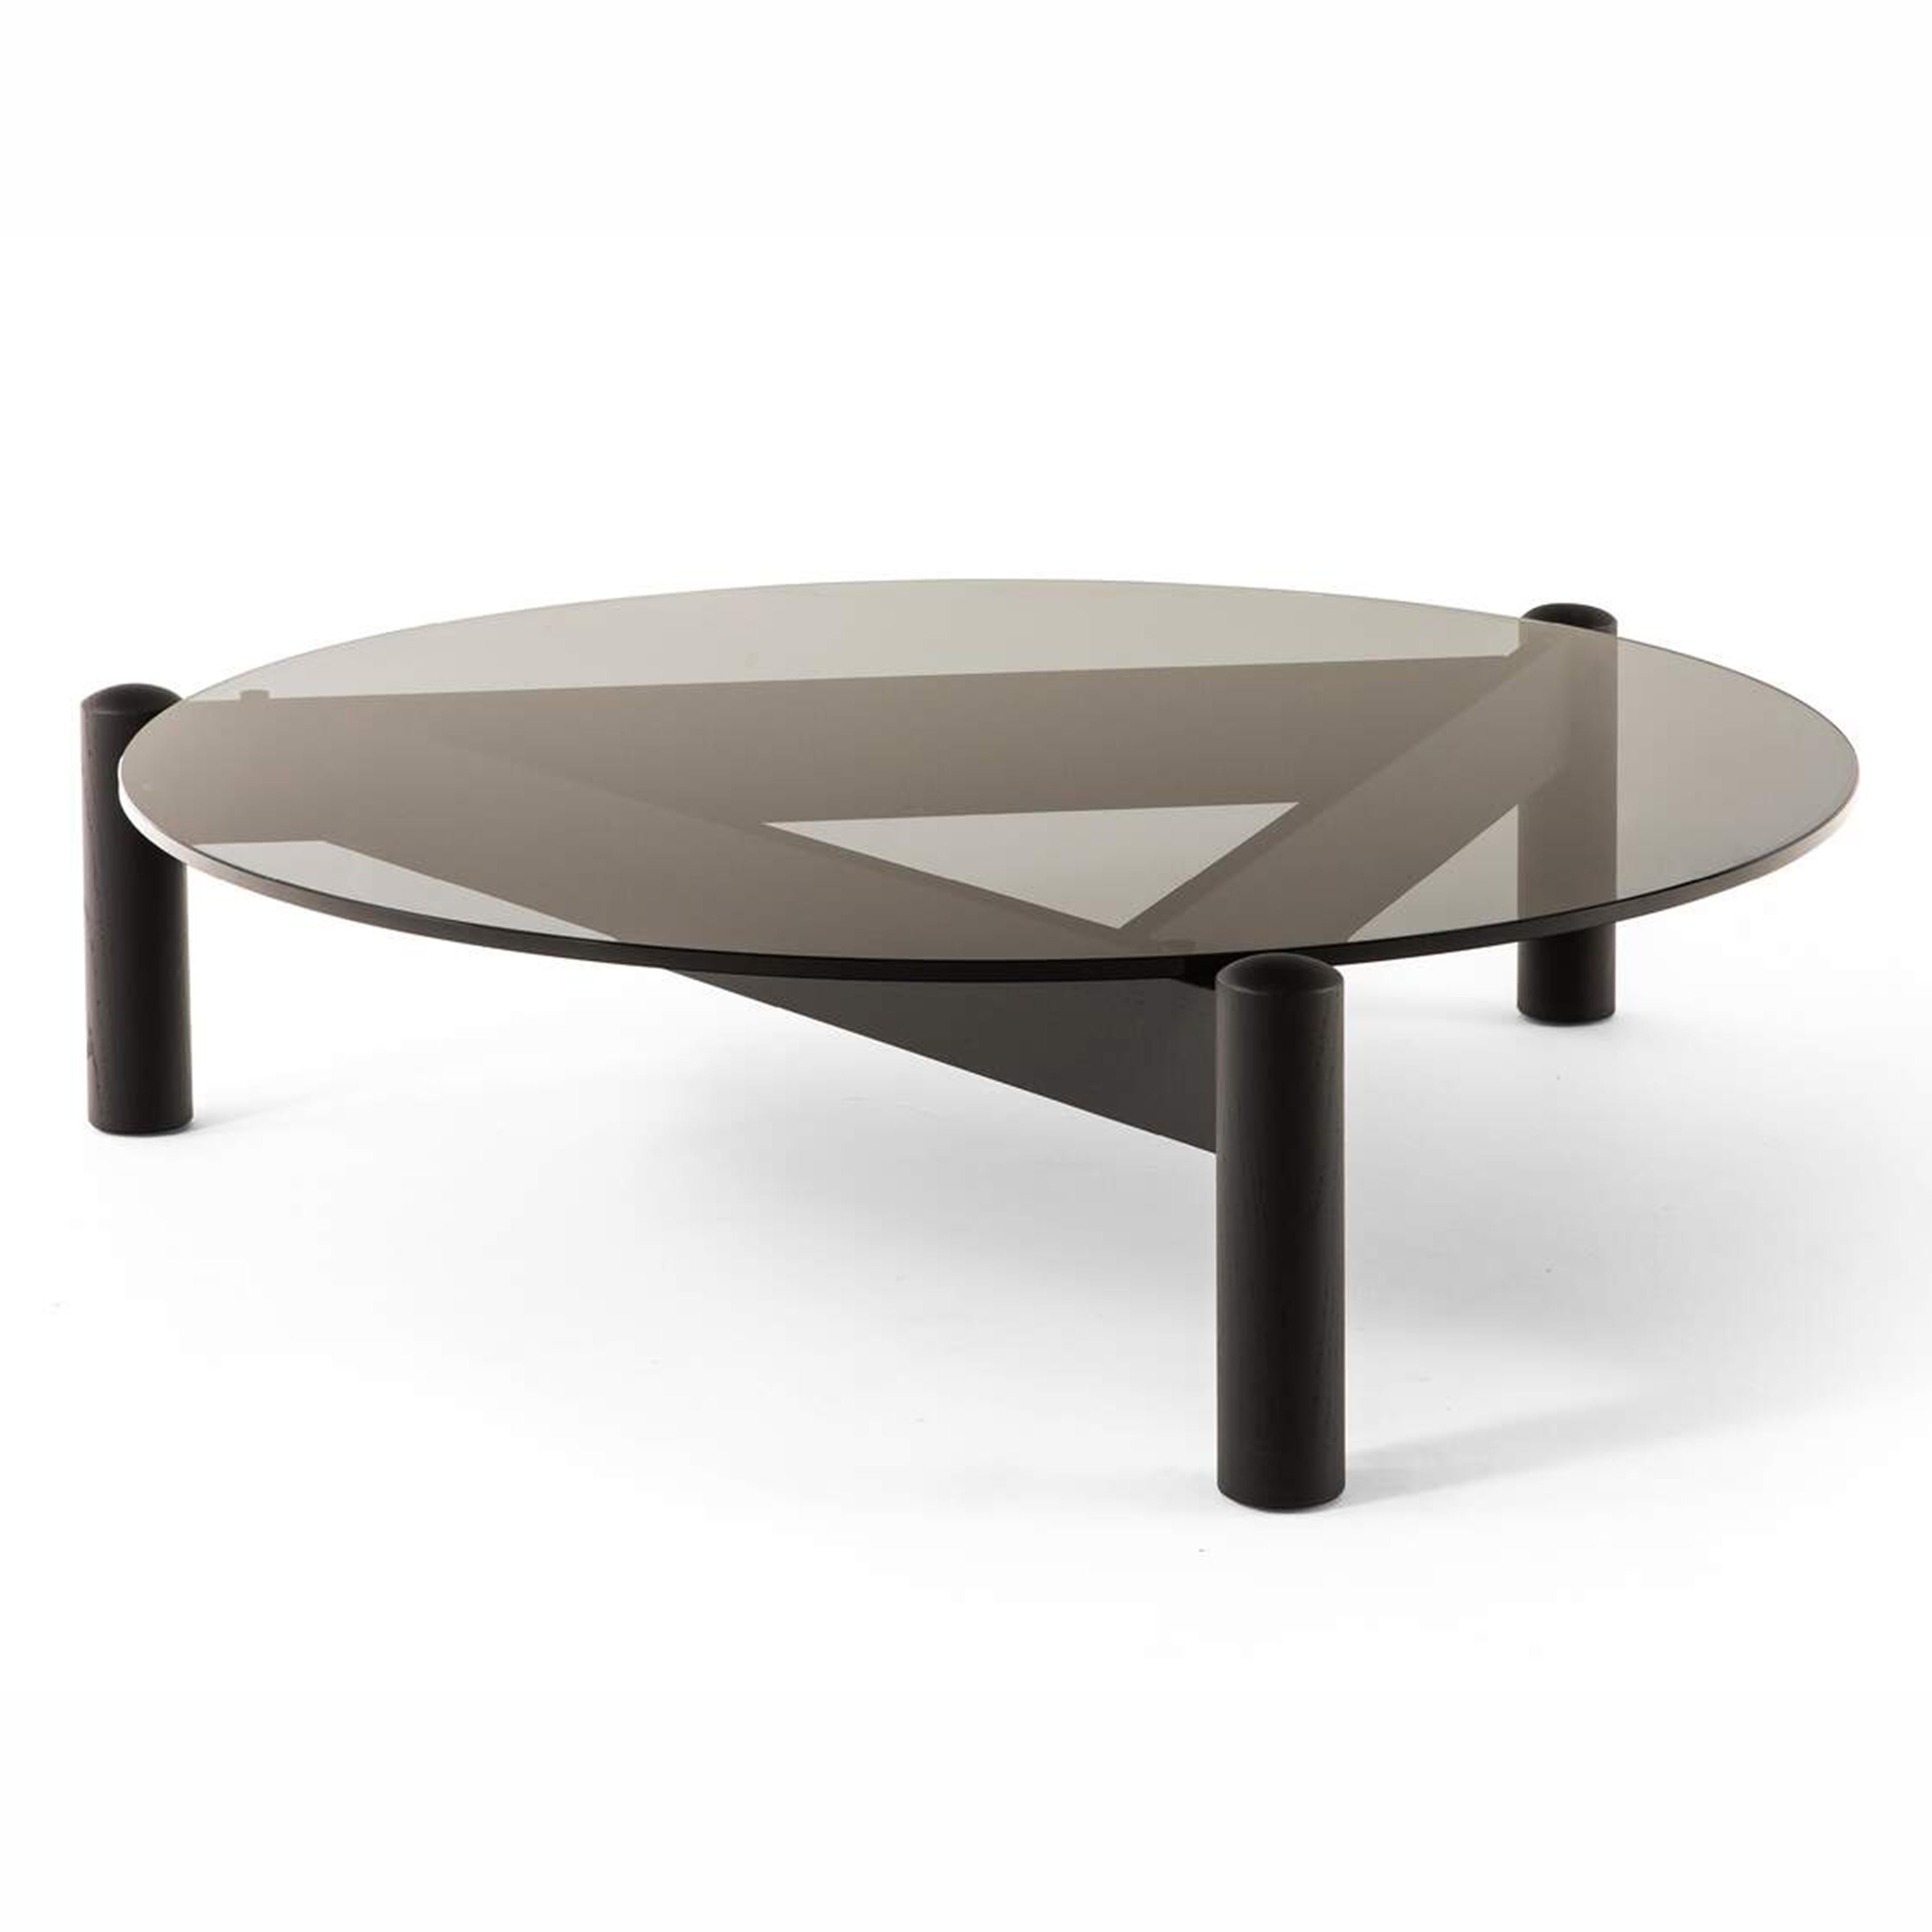 Table designed by Charlotte Perriand in 1937. Relaunched in 2019.
Manufactured by Cassina in Italy.

The first model of this historic design low table was crafted in 1937 for Charlotte Perriand’s studio in Montparnasse.

The first example of this